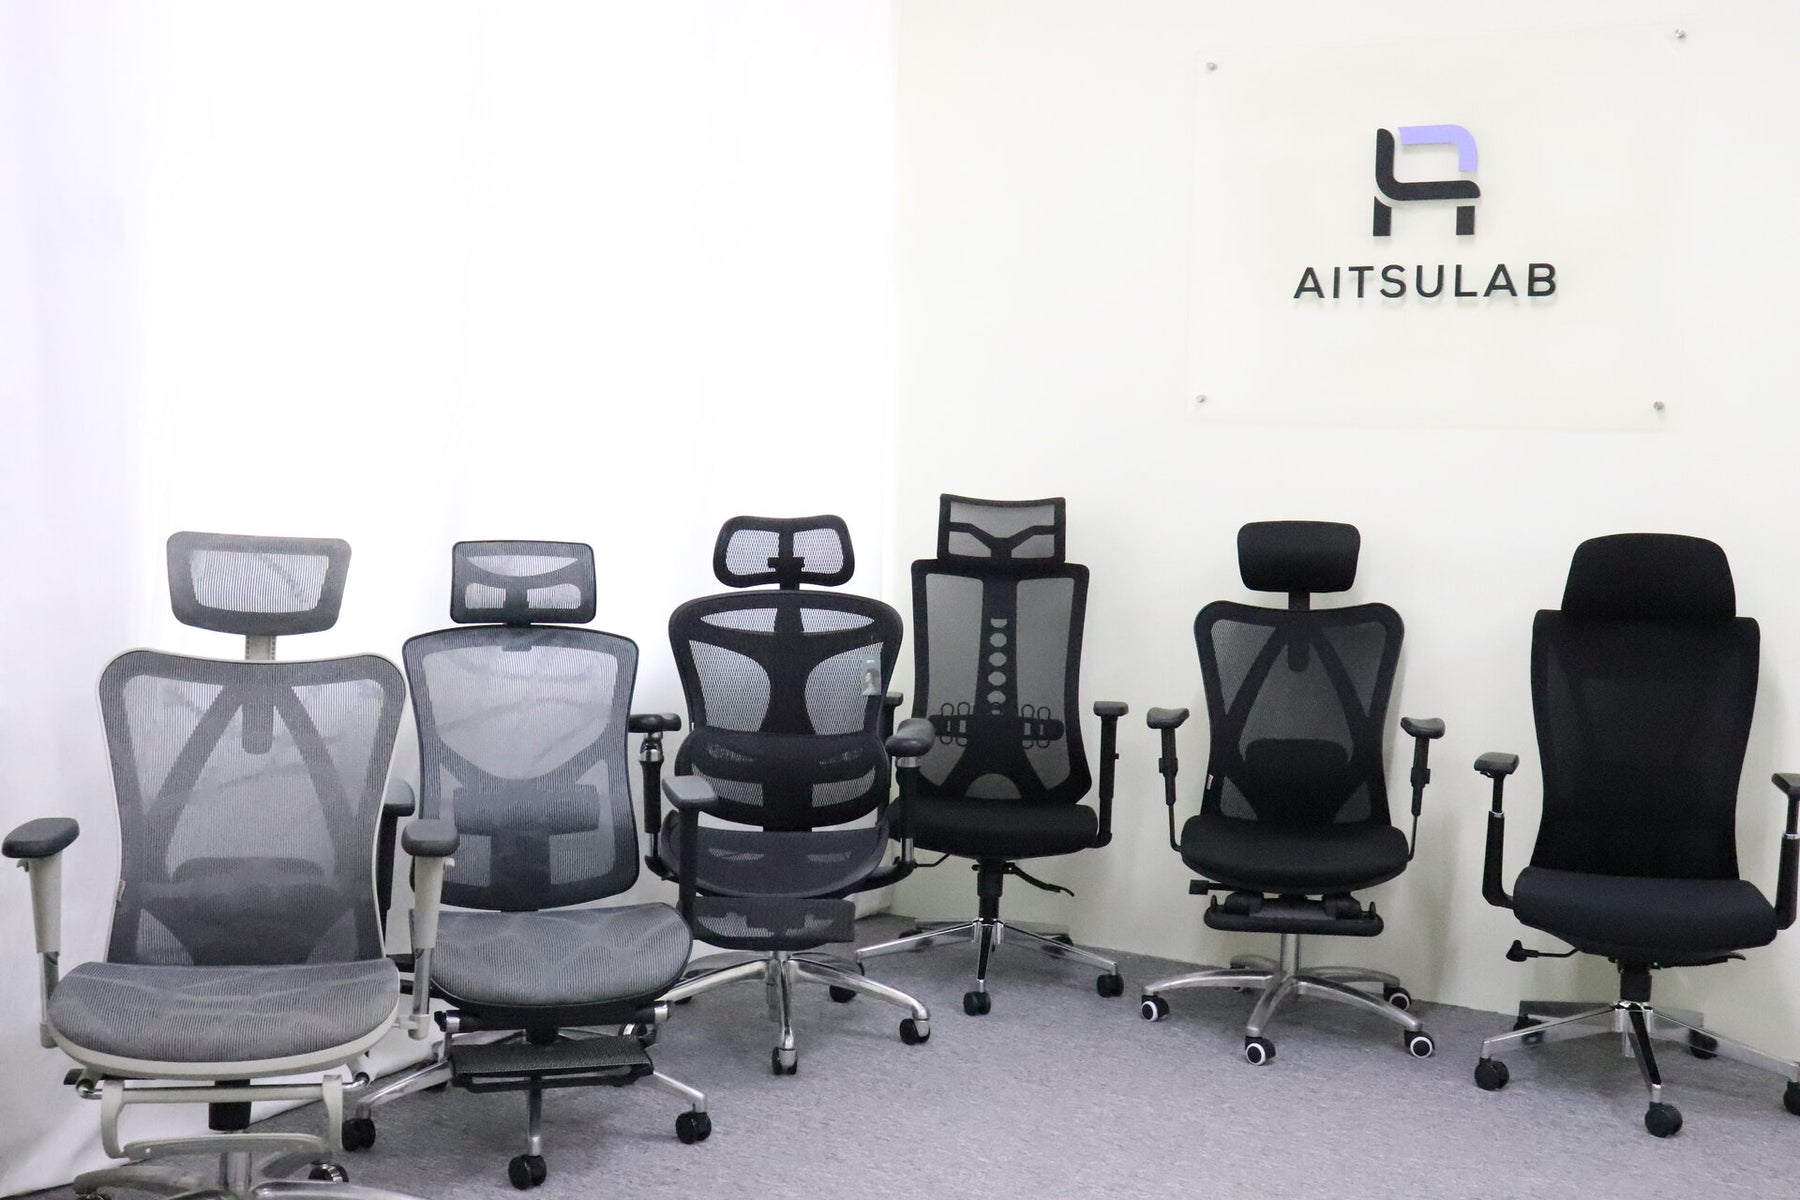 Ergonomic office chairs Malaysia by AITSULAB